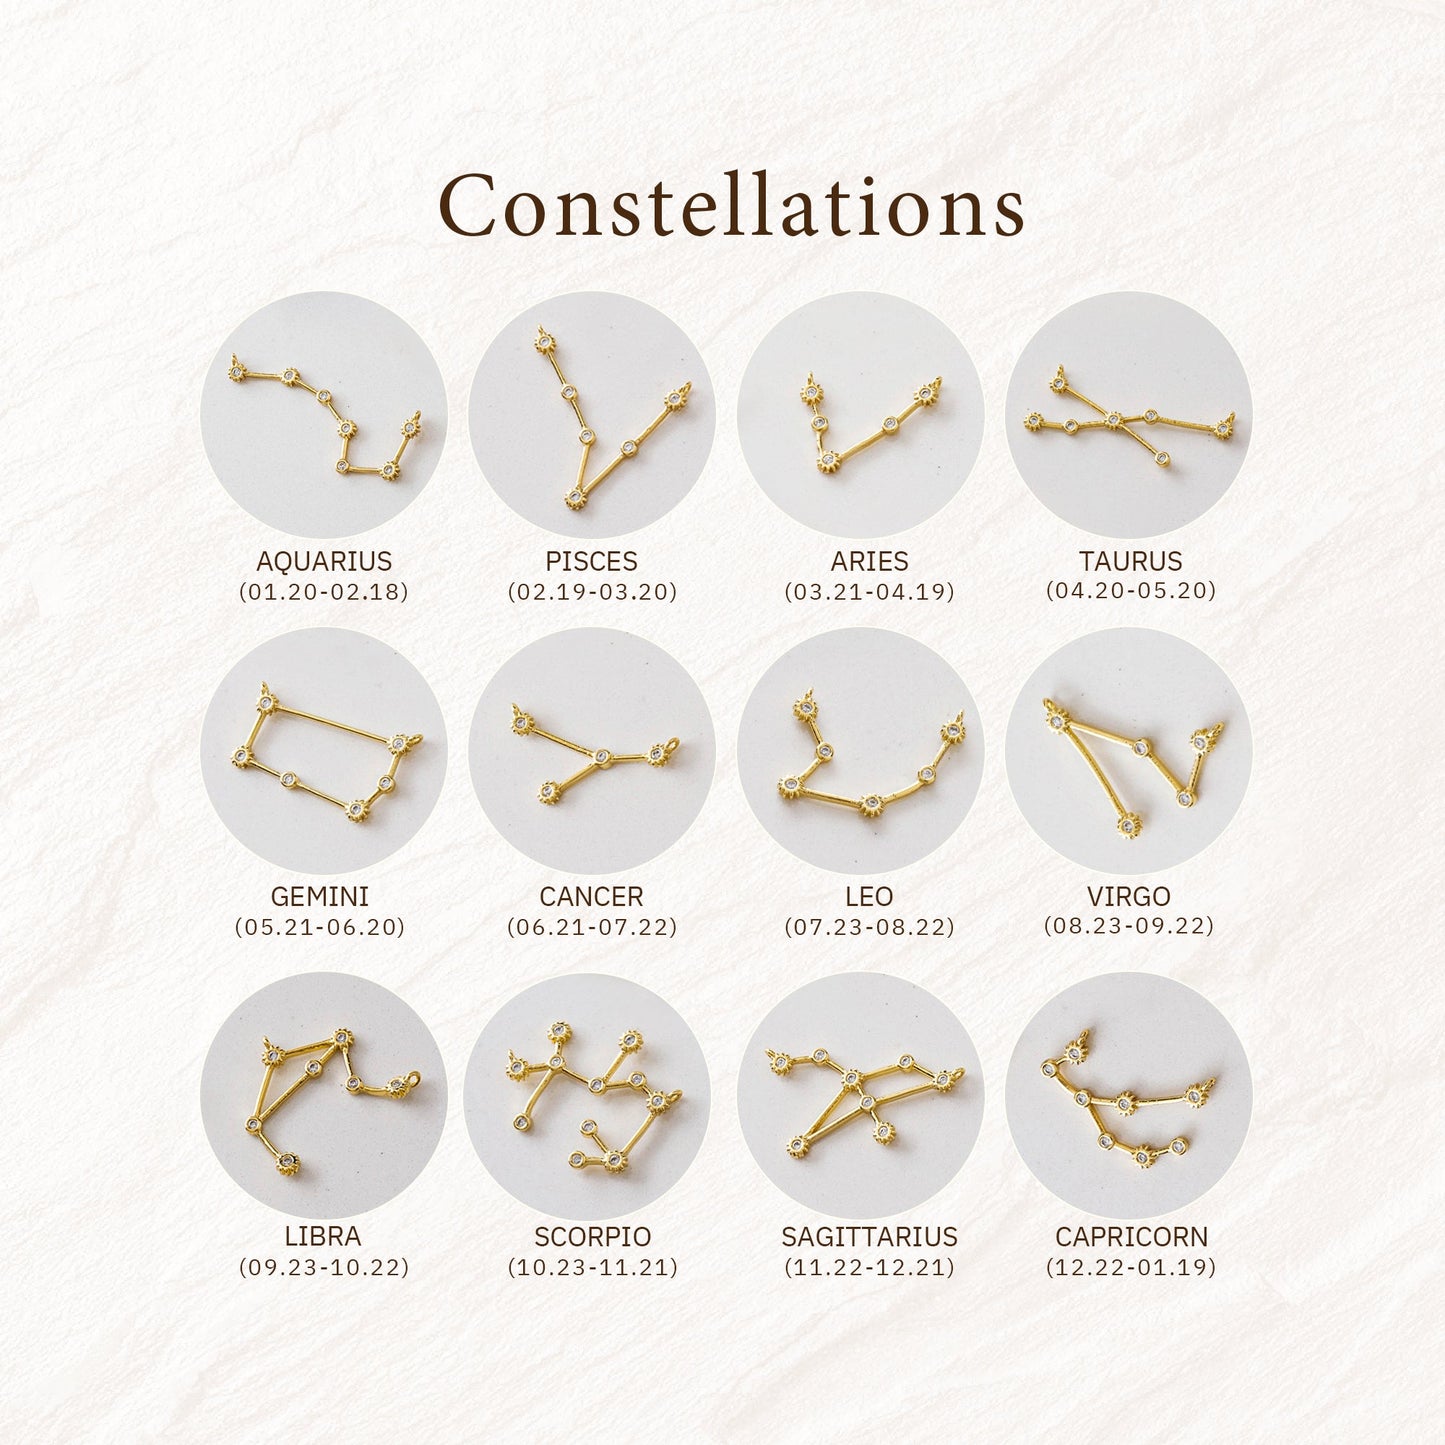 The showcase photos of 12 constellations